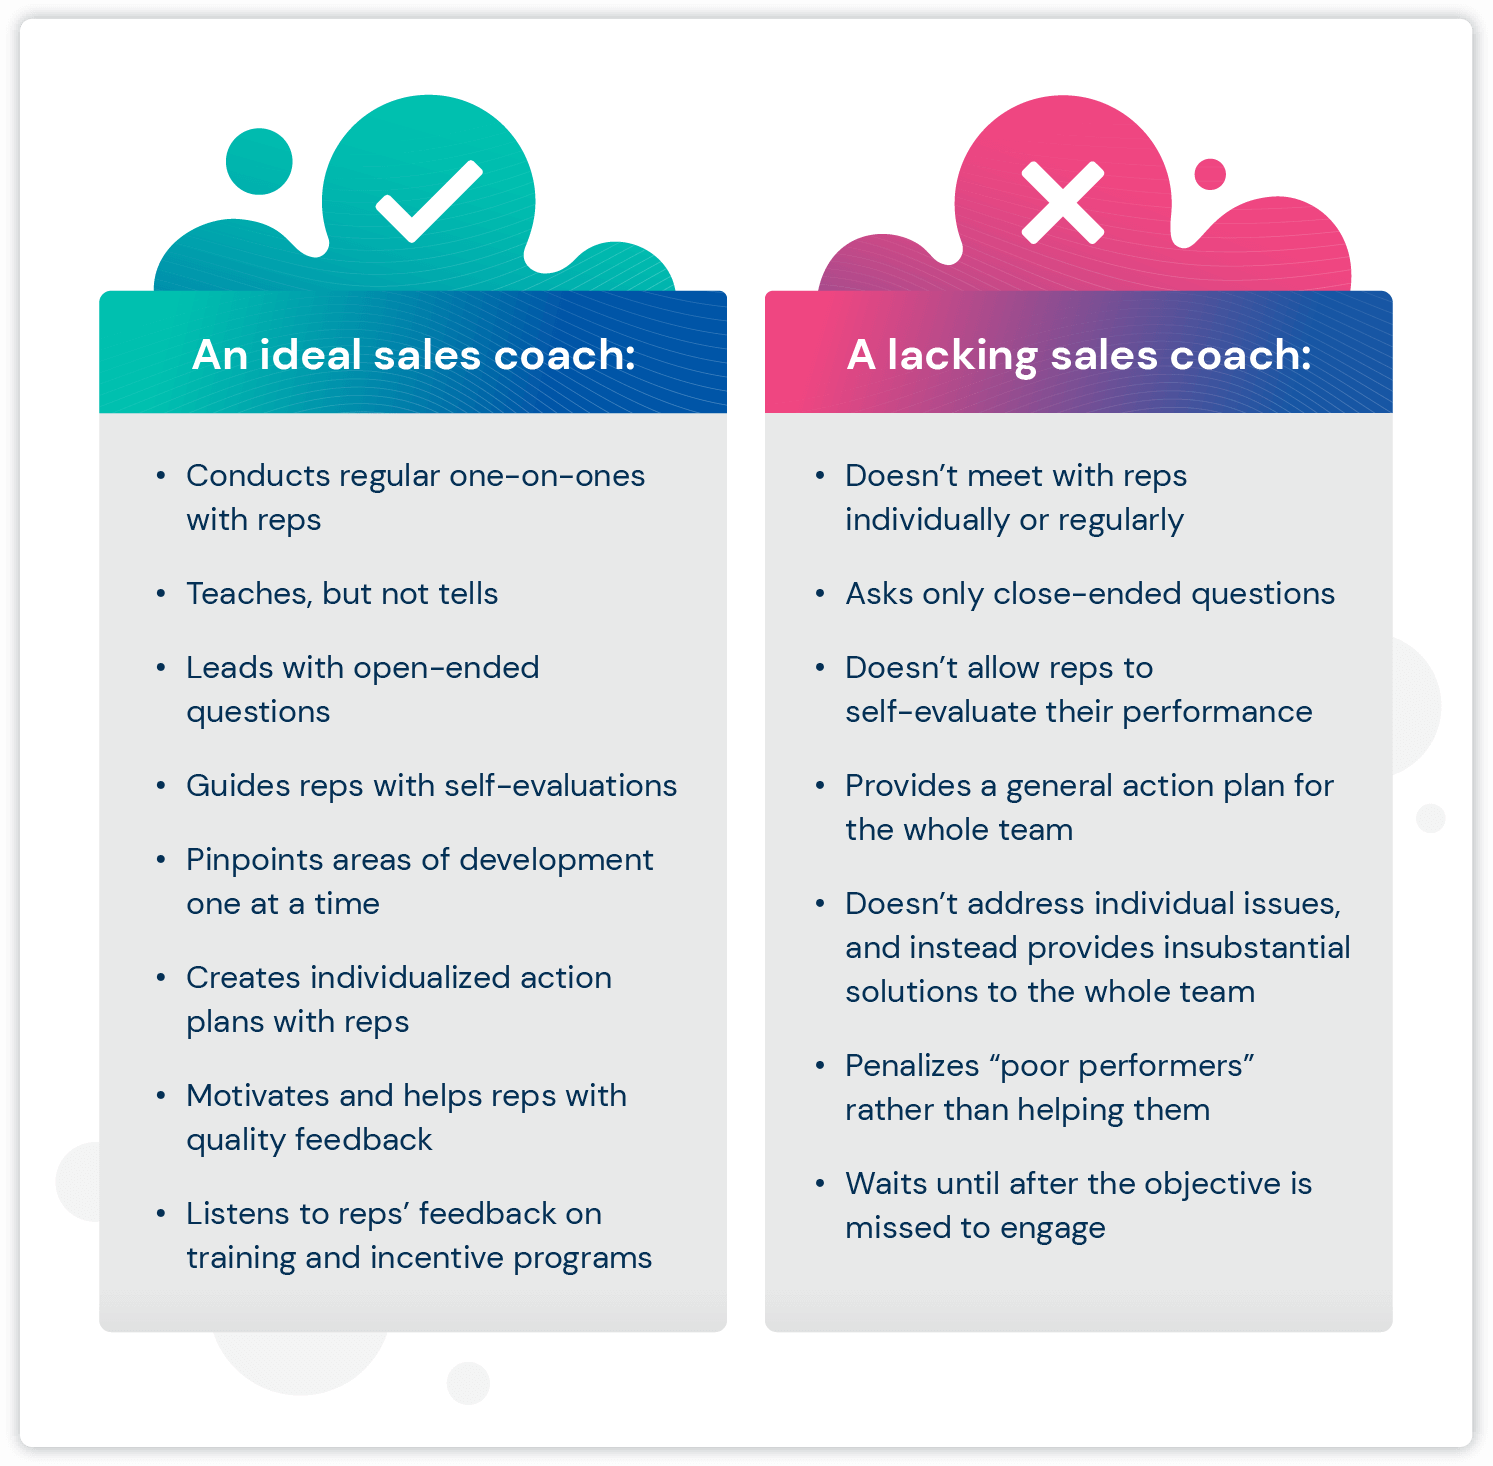 A chart showing the differences between an ideal sales coach and a lacking sales coach